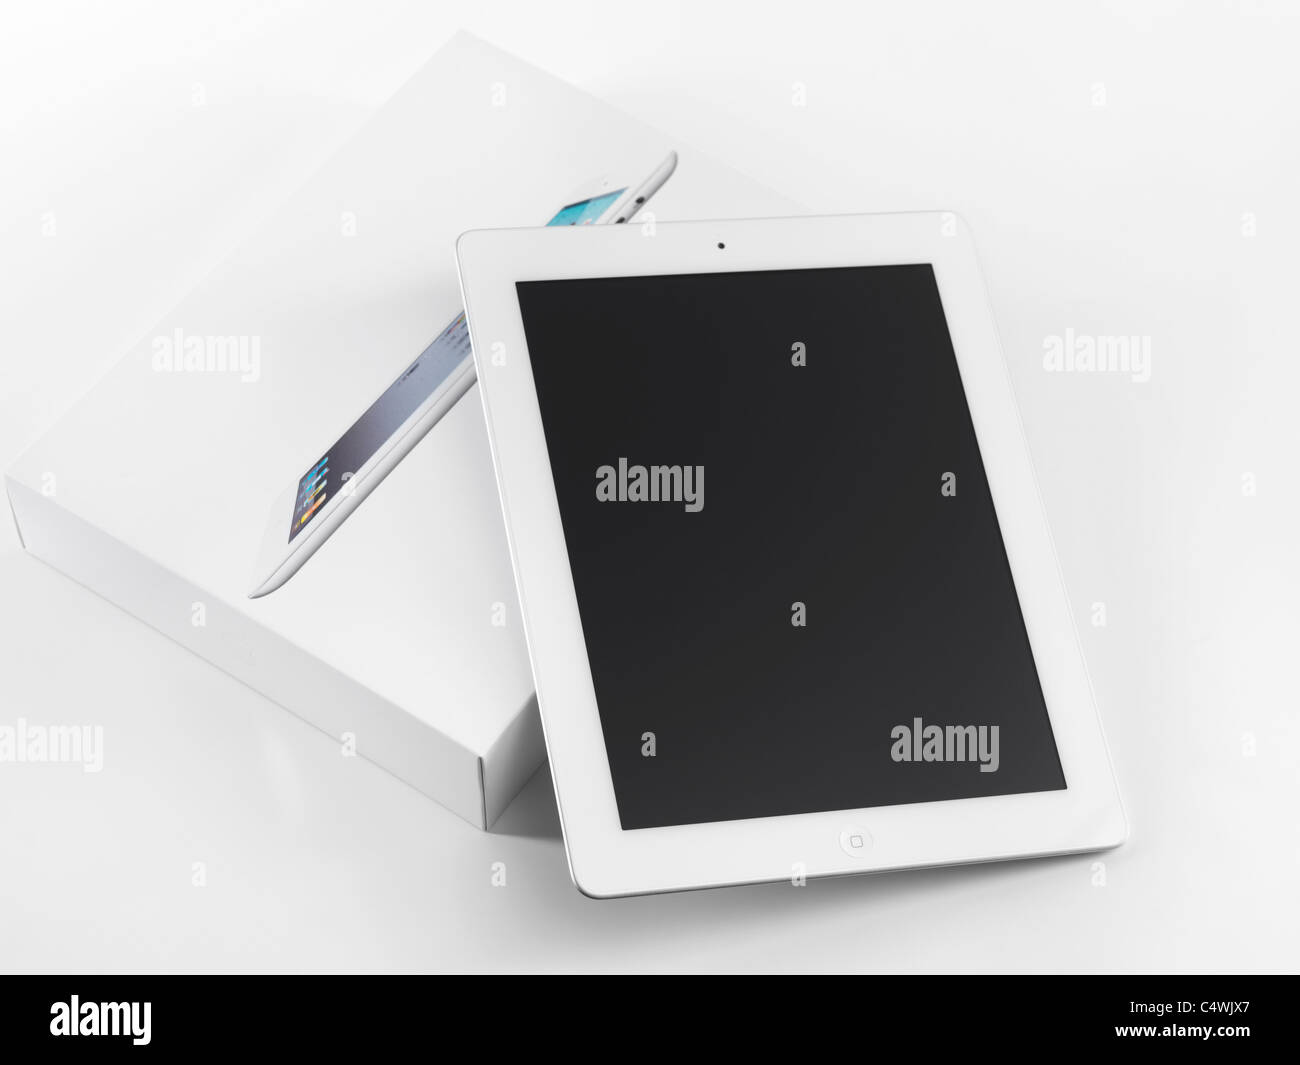 New Apple iPad 2 just out of the box. Isolated on white background. Stock Photo